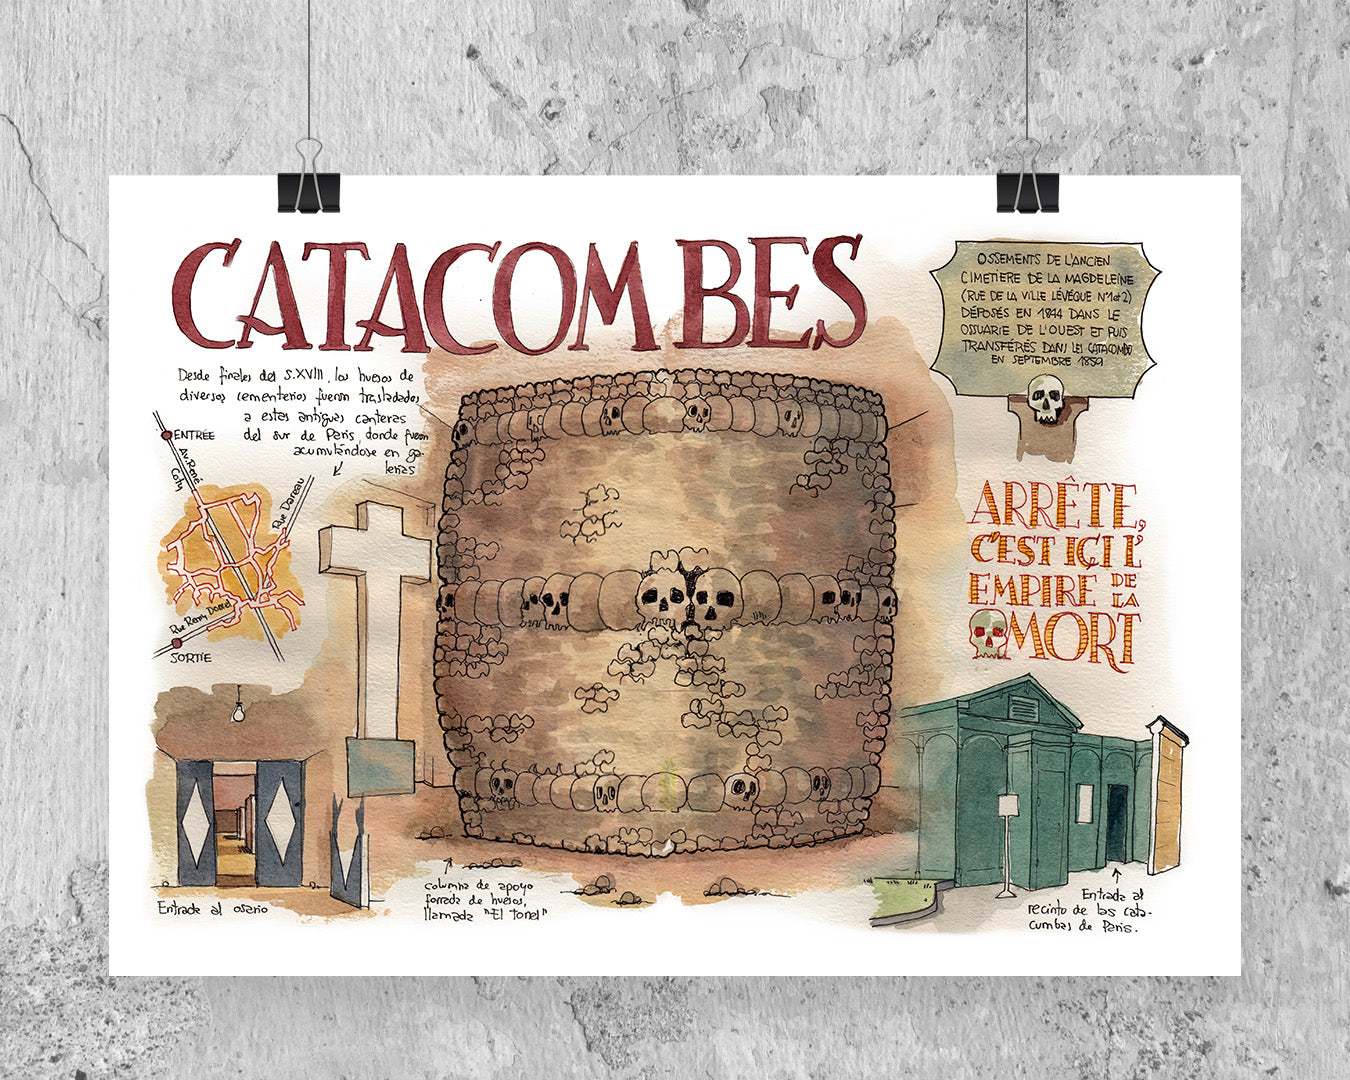 THE CATACOMBS OF PARIS - Watercolor